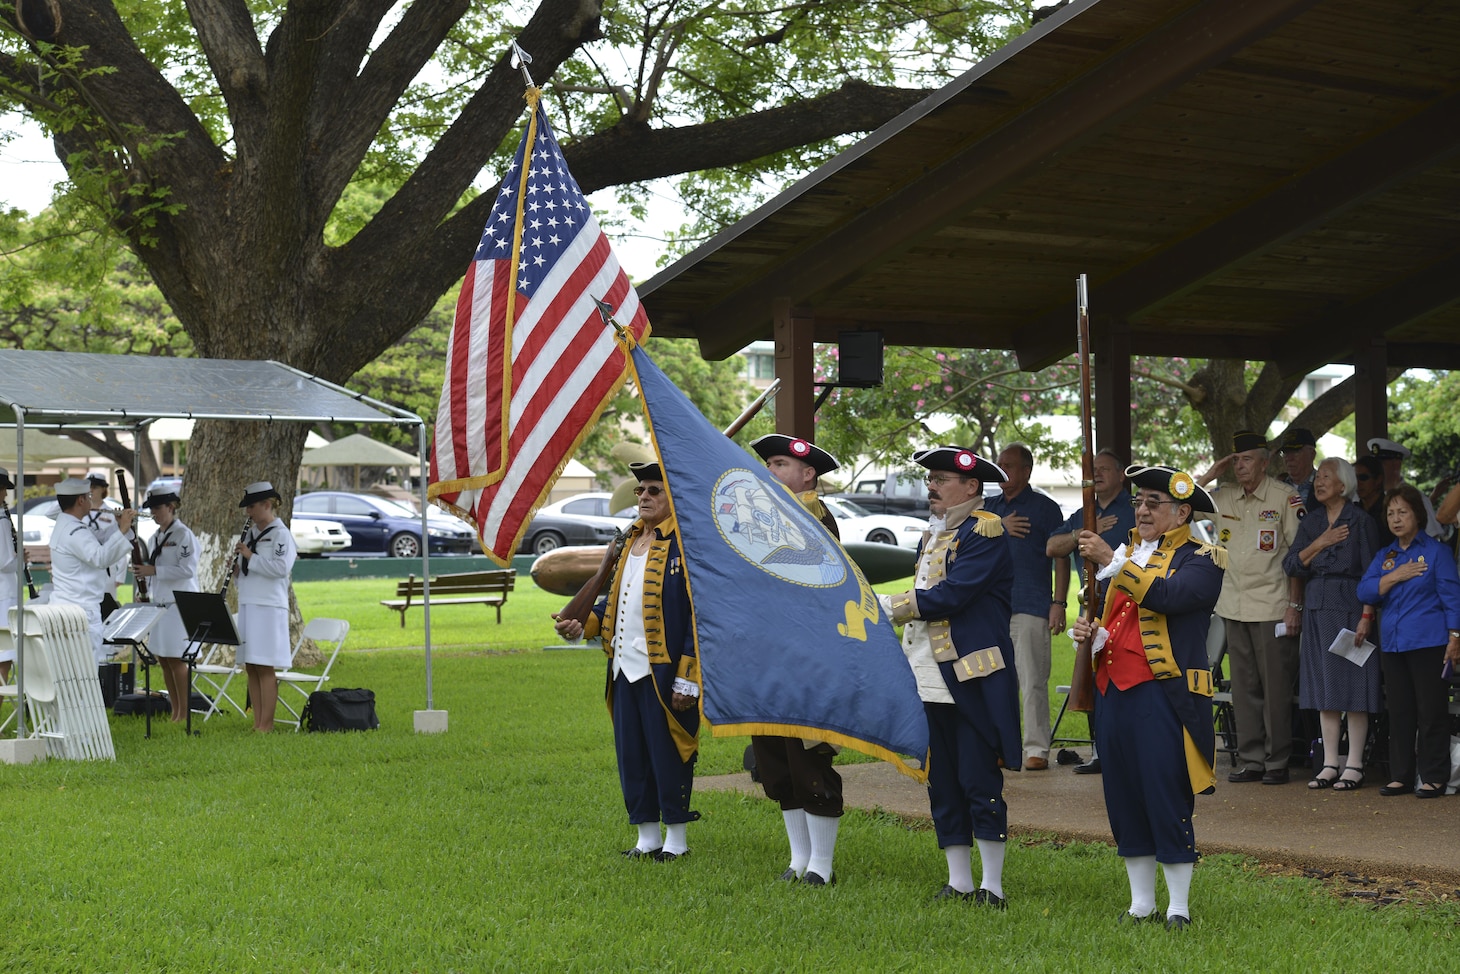 160530-N-LY160-729 
JOINT BASE PEARL HARBOR-HICKAM, Hawaii (May 30, 2016) – Members from National Sojourners parade the colors during the Memorial Day ceremony at the USS Parche Submarine Park and Memorial at Joint Base Pearl Harbor-Hickam. The service honored past submariners and paid tribute to the 65 U.S. submarines lost since 1915, with 52 lost during World War II alone. (U.S. Navy photo by Mass Communication Specialist 2nd Class Michael H. Lee)